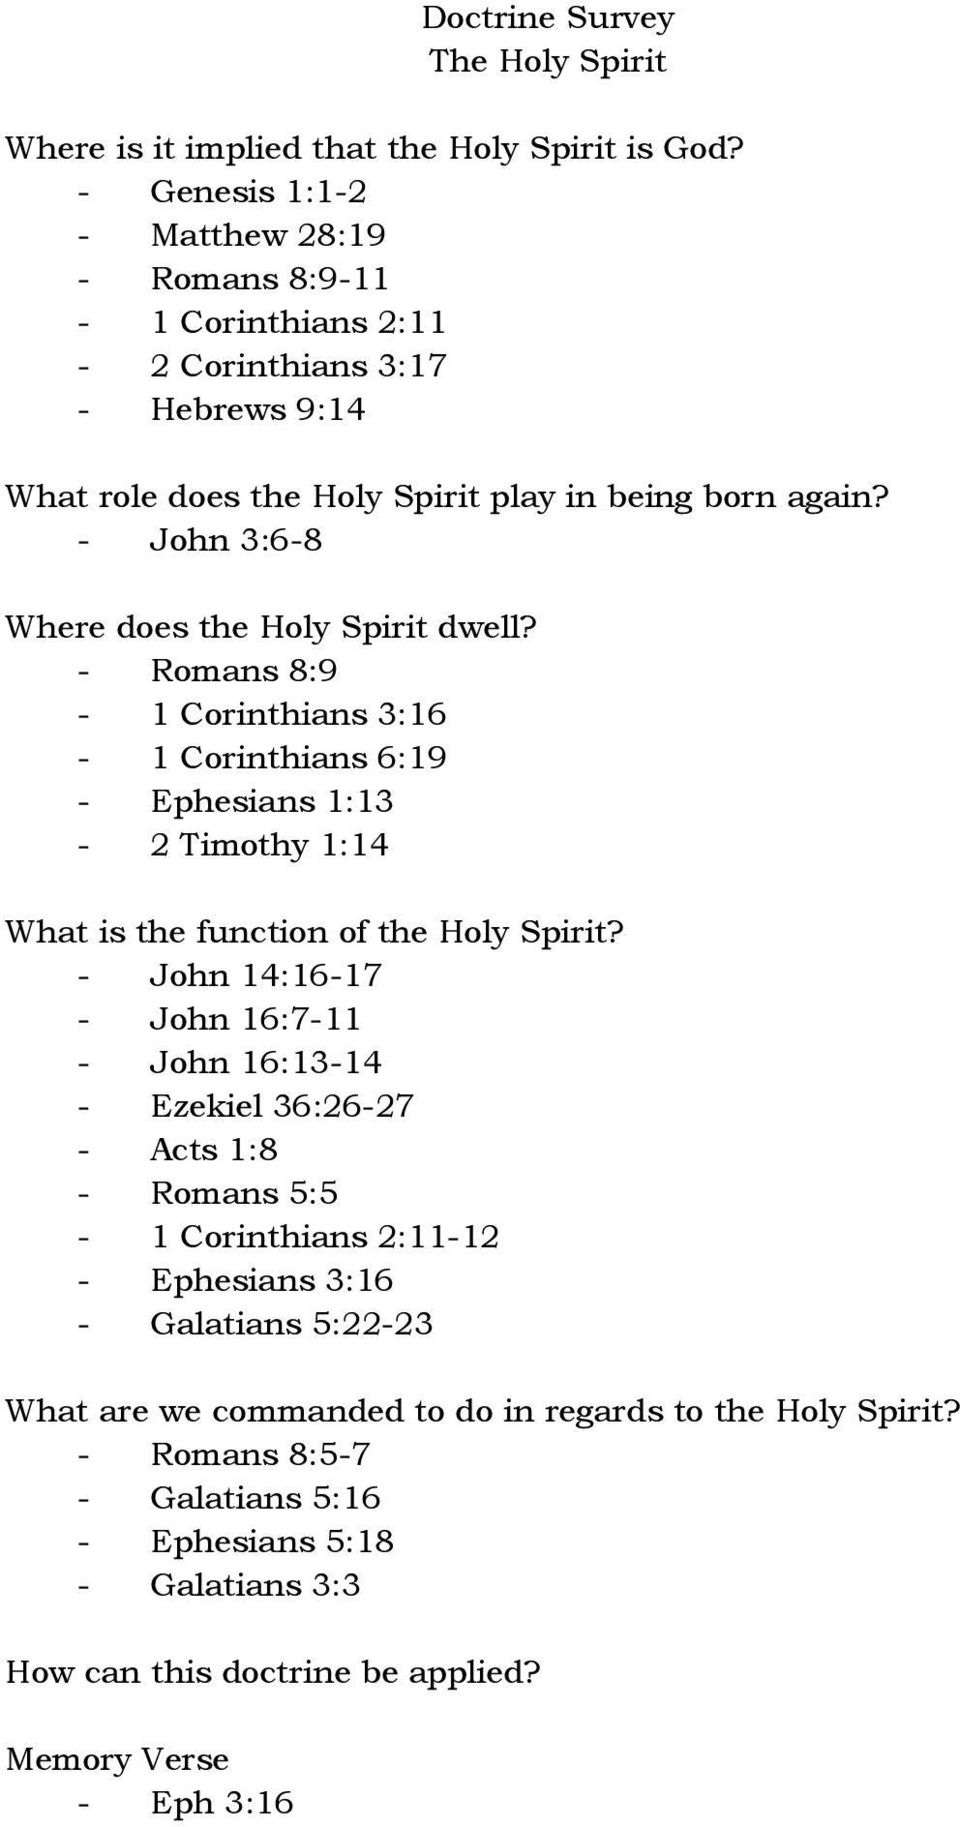 - John 3:6-8 Where does the Holy Spirit dwell? - Romans 8:9-1 Corinthians 3:16-1 Corinthians 6:19 - Ephesians 1:13-2 Timothy 1:14 What is the function of the Holy Spirit?